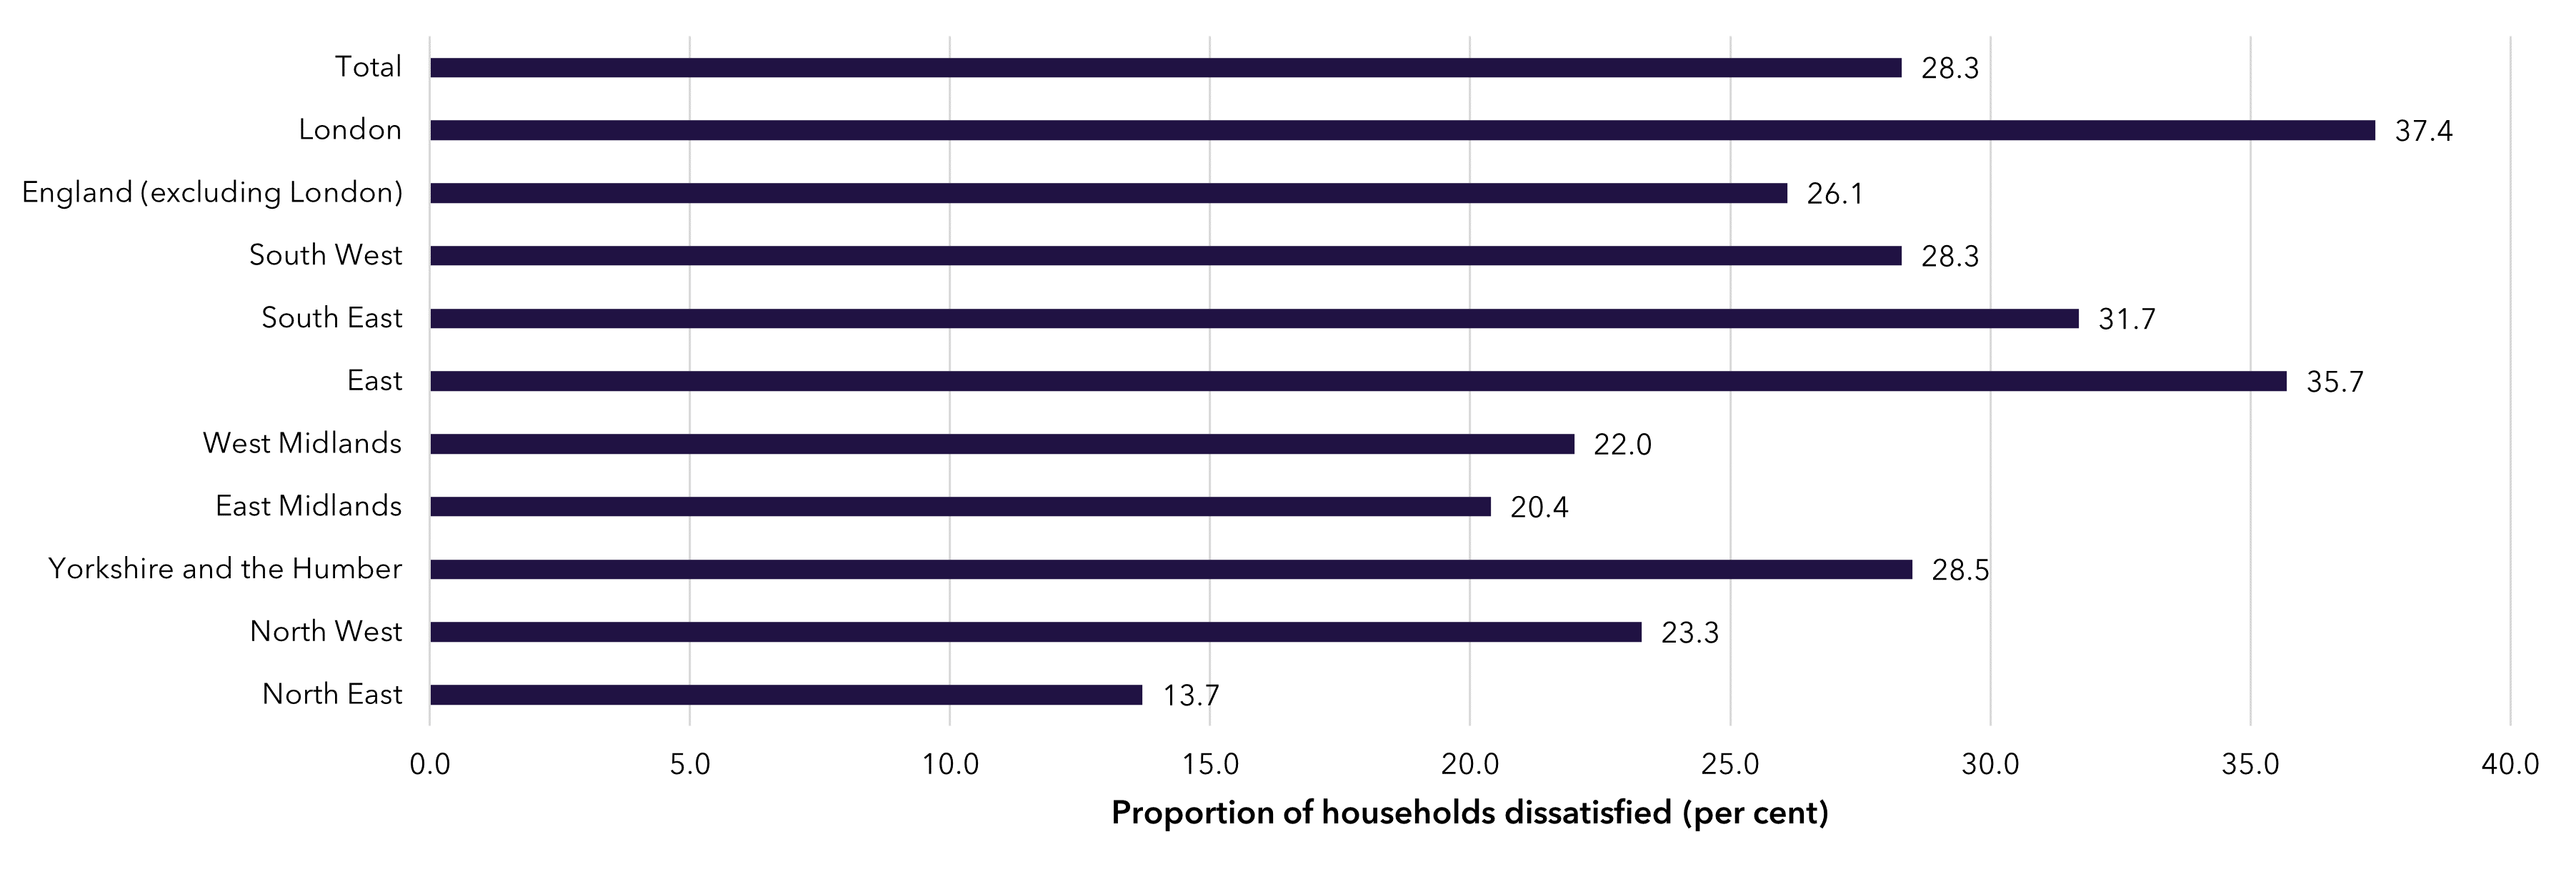 Proportion of households dissatisfied per cent chart